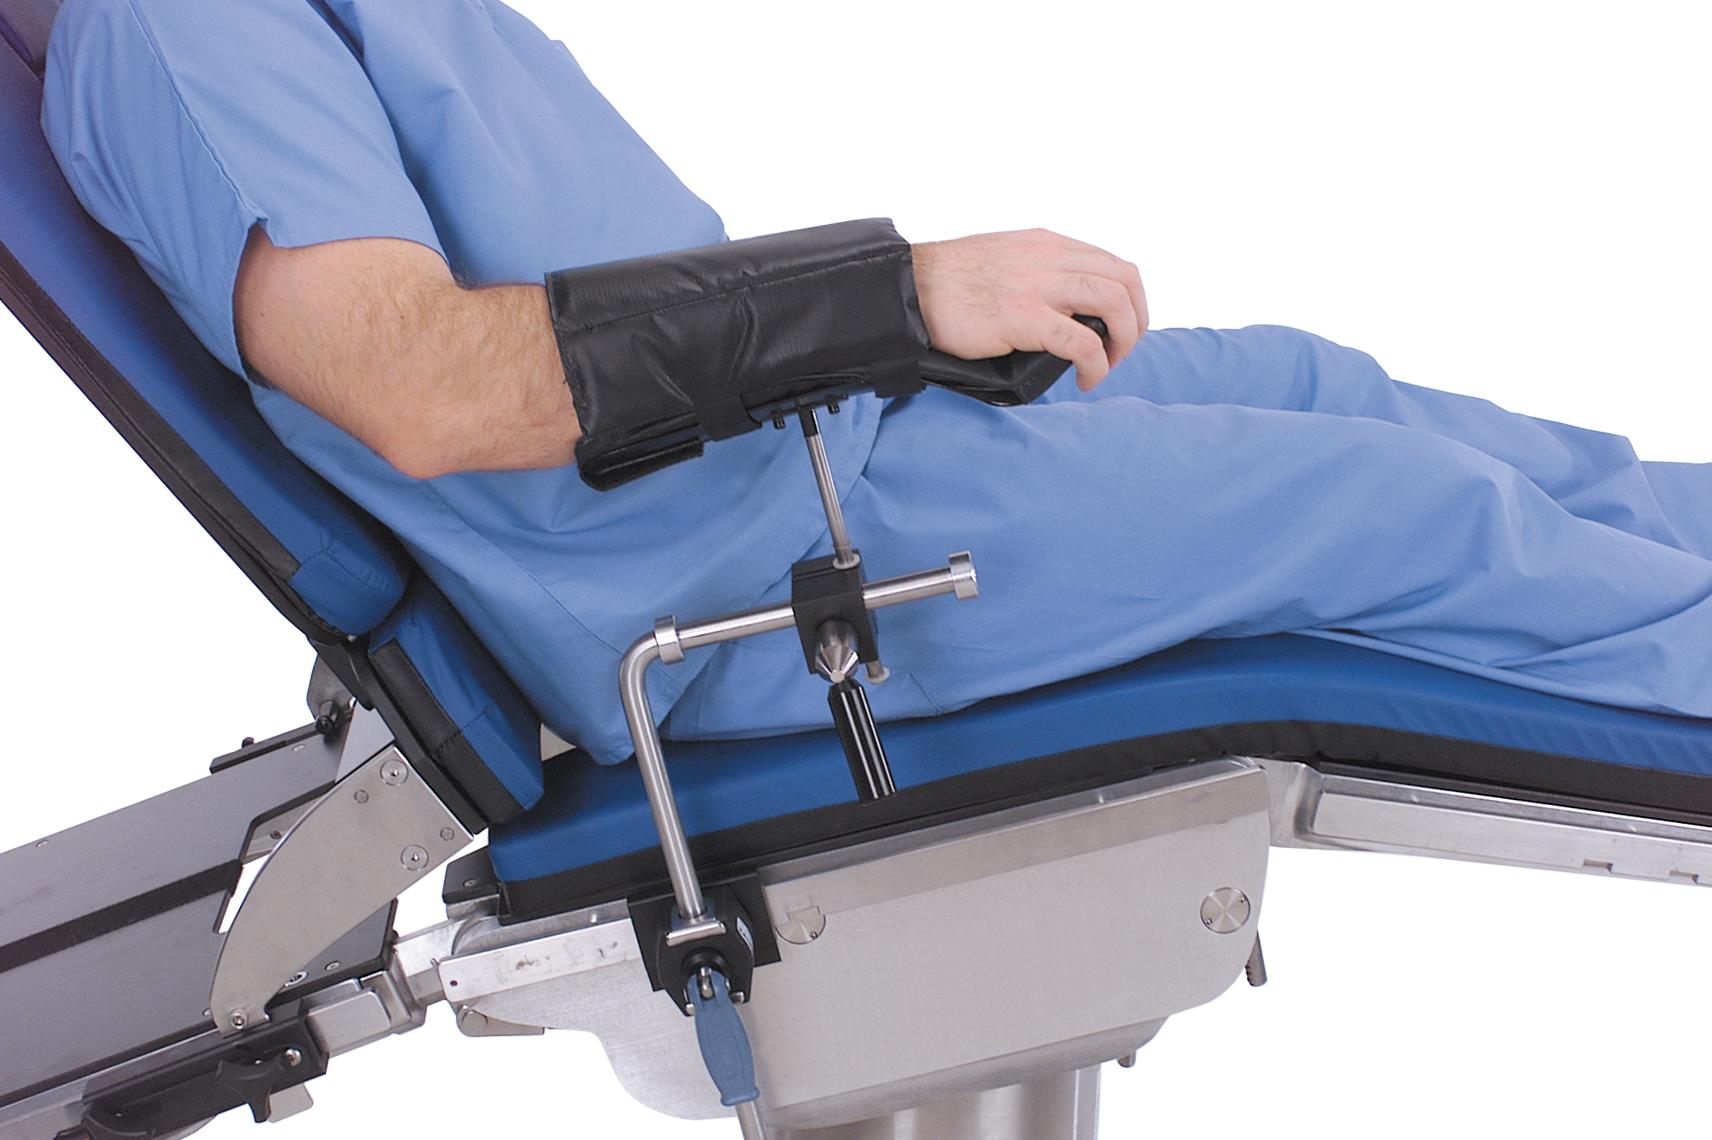 Arm support. Medical Leg Holders Universal fixing device operating Table Accessories. Nursing Armrest. Operations support.